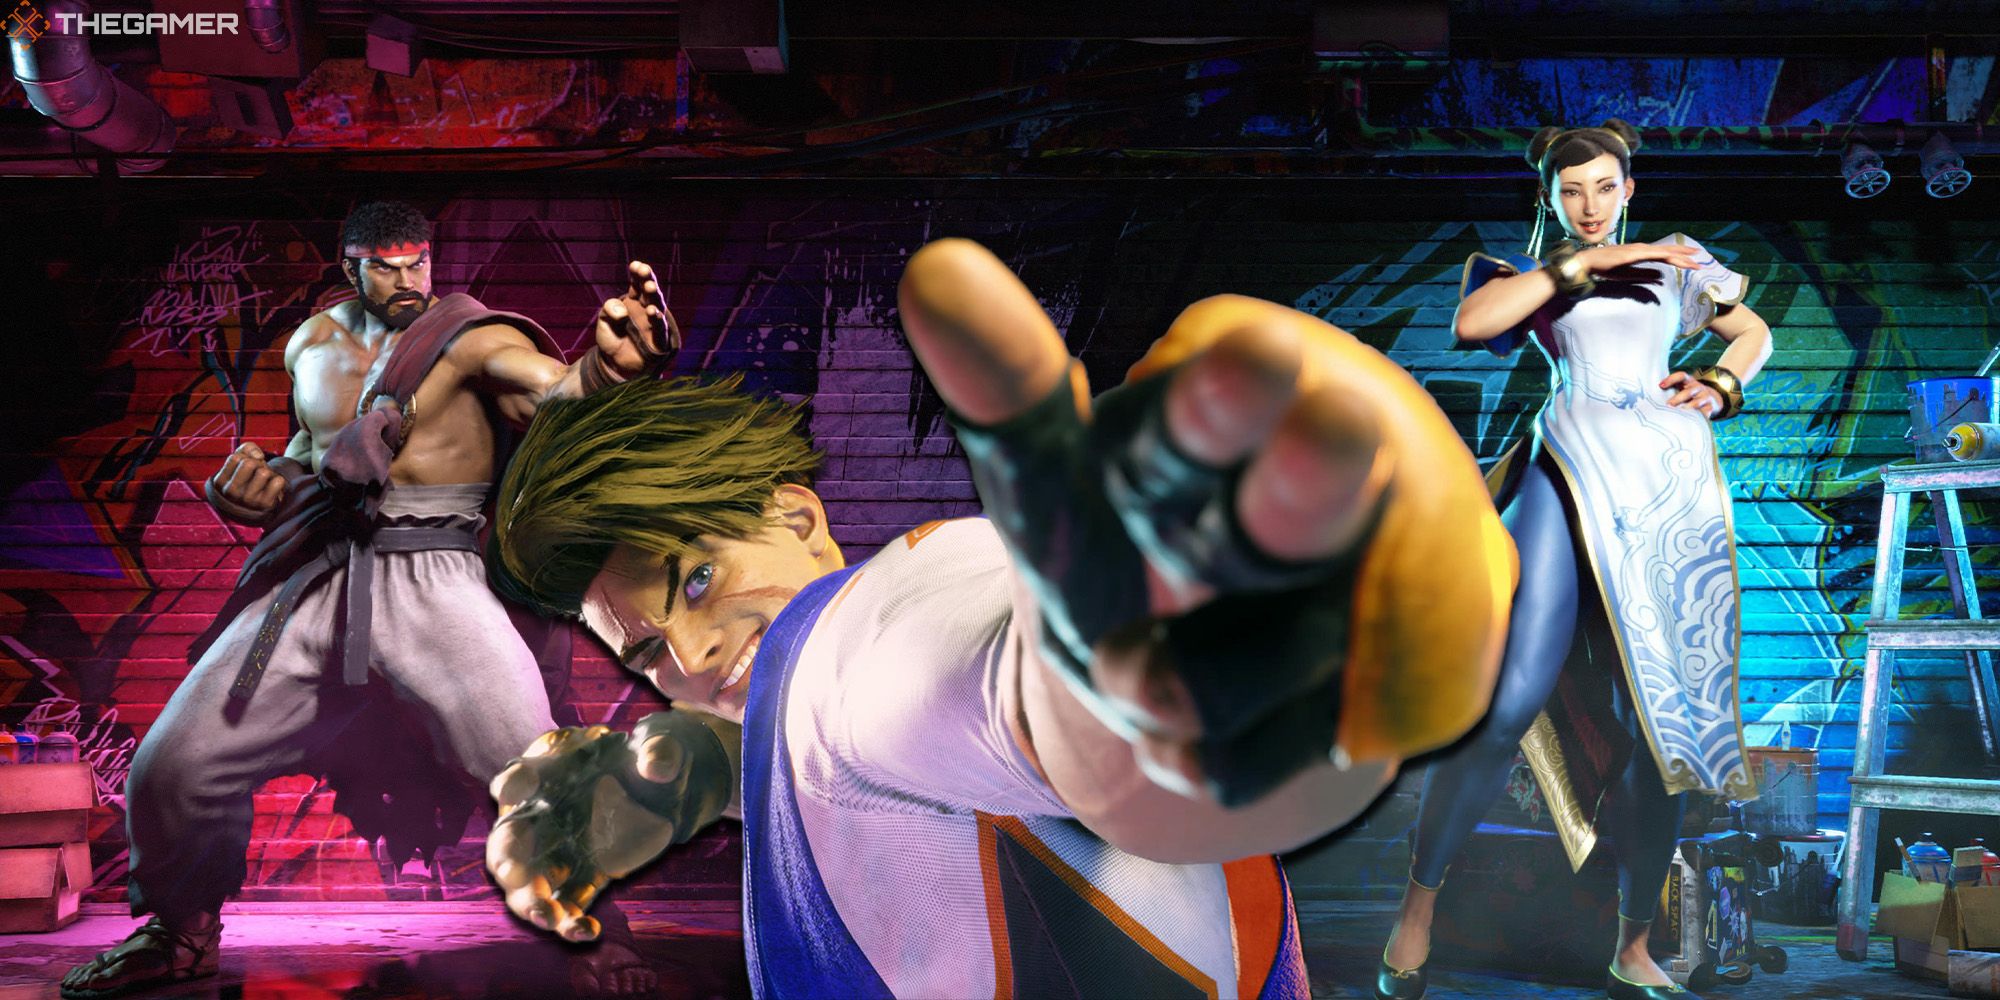 Luke, from Street Fighter 6, sends a jab forward while Ryu and Chun-li stand in the background against a graffiti adorned wall.